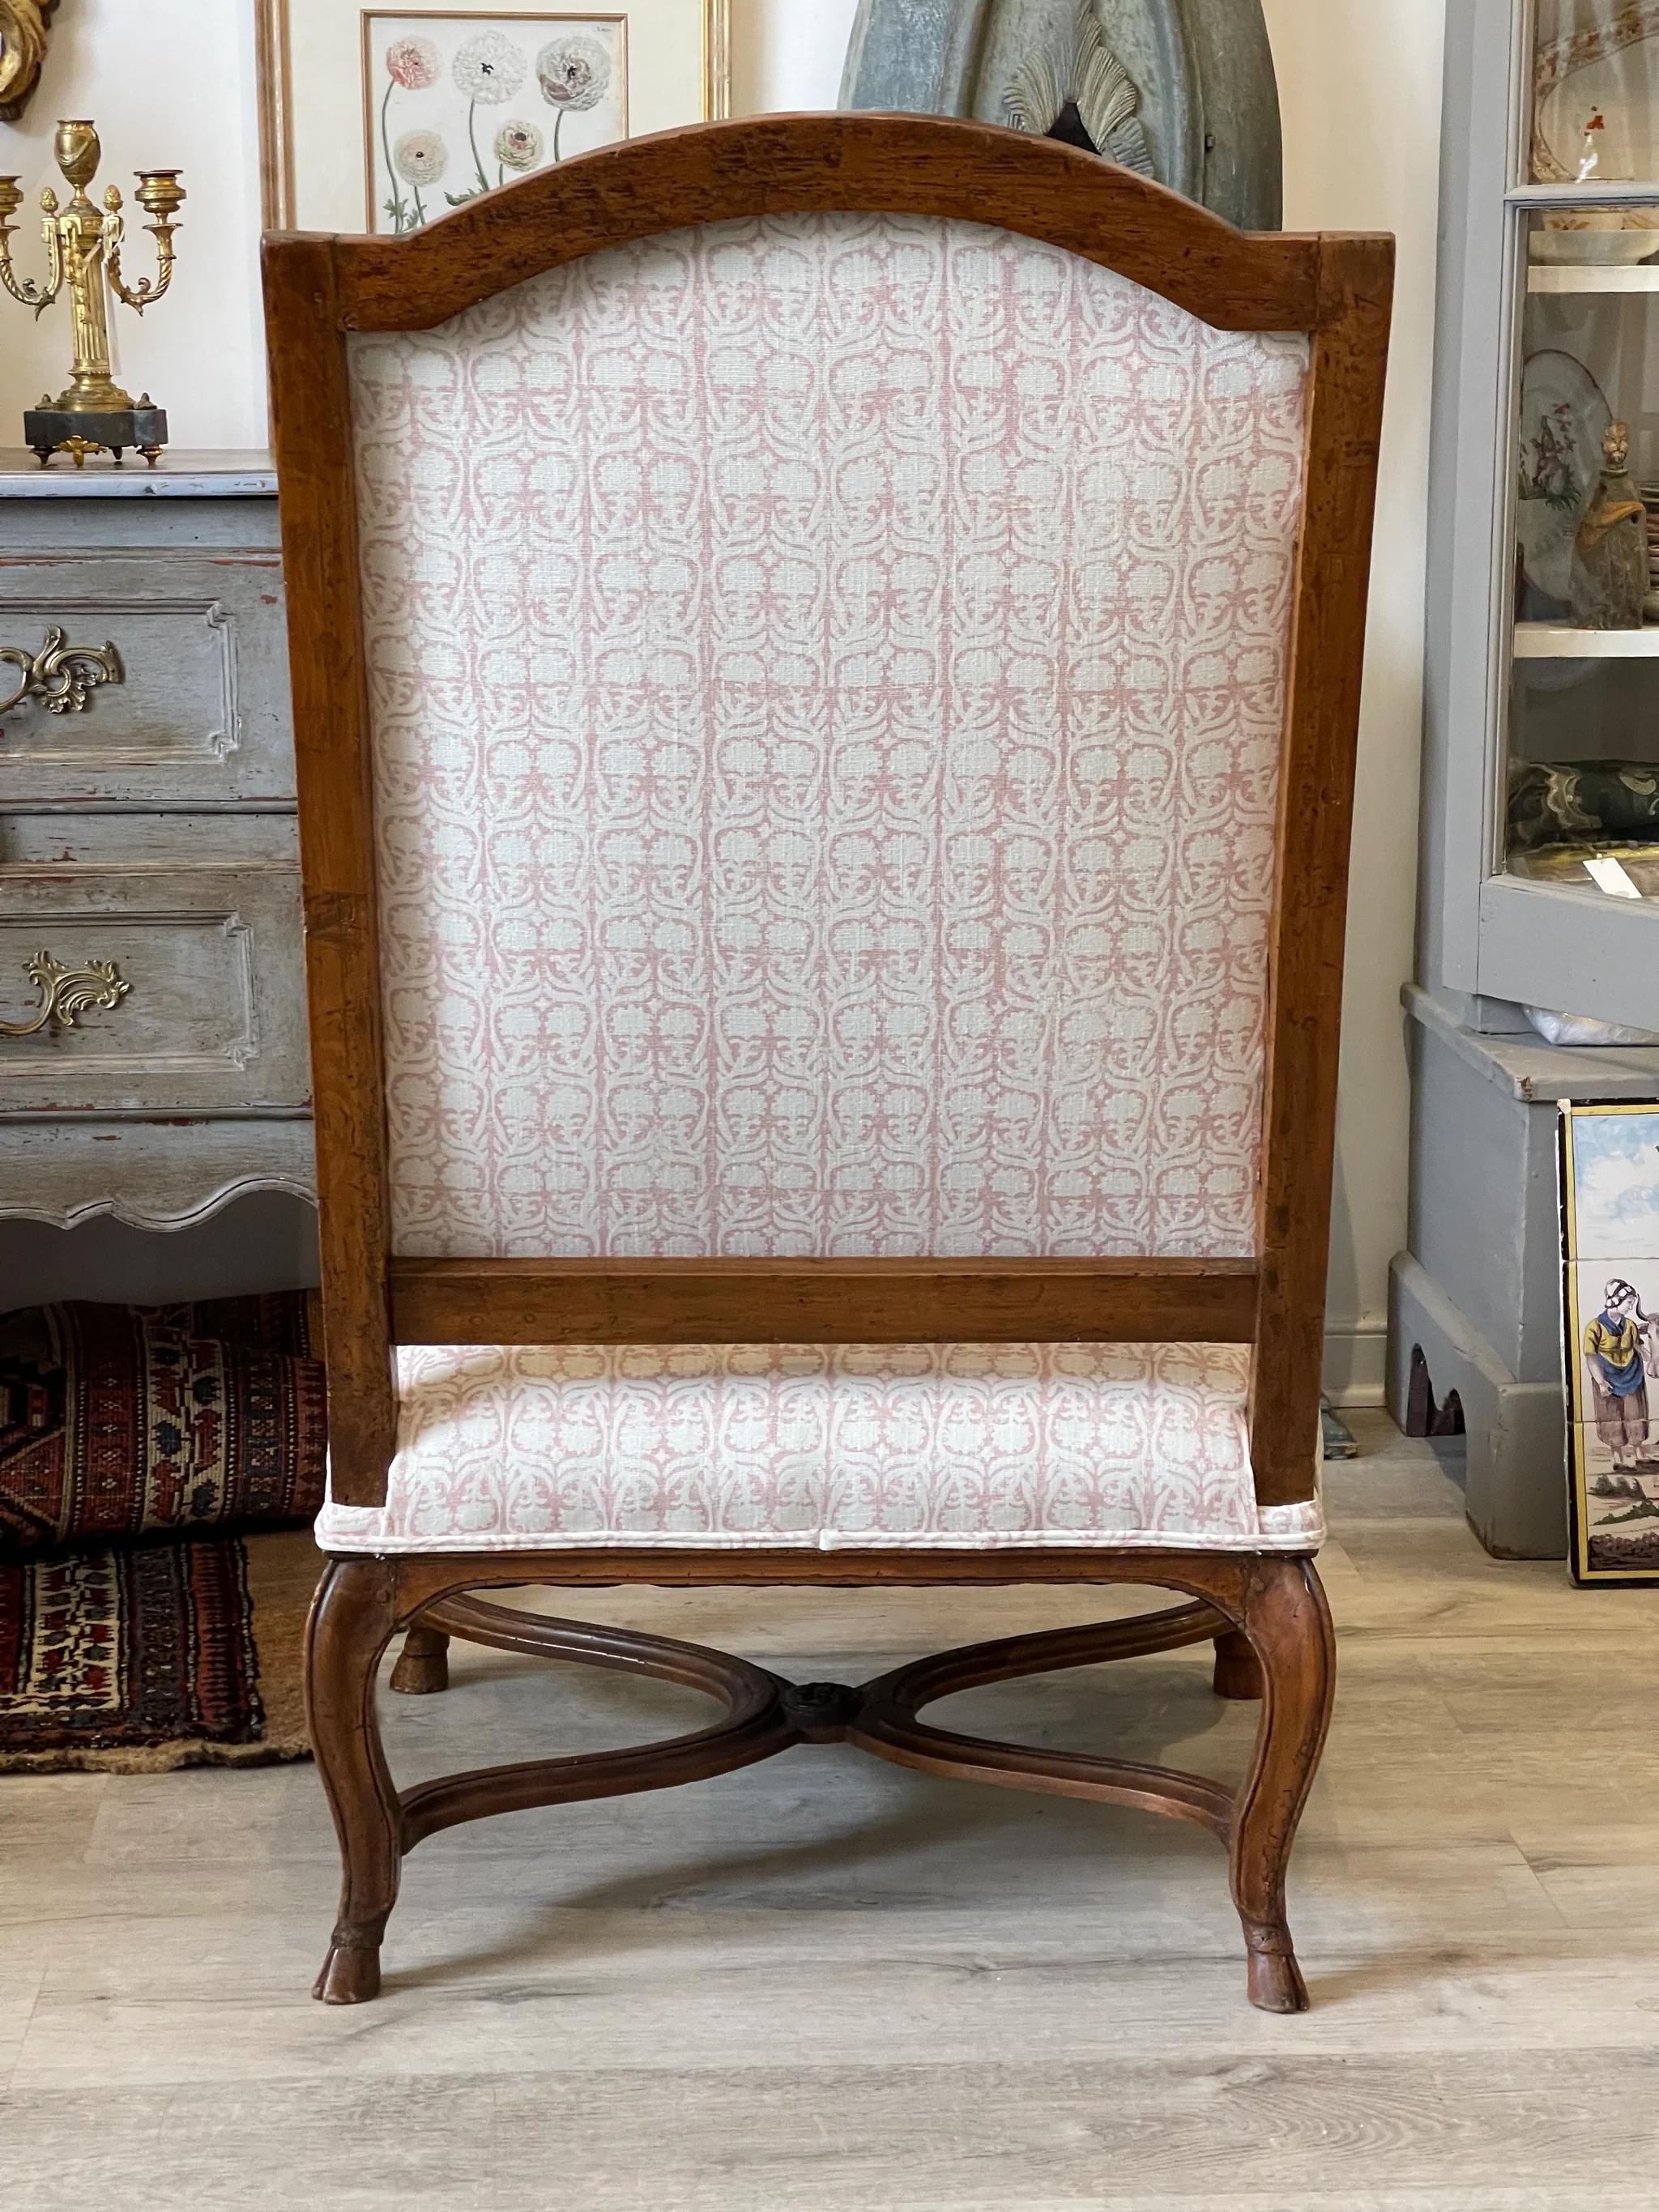 Upholstery 18th Century French Provincial Walnut Fauteuil a la Reine Arm Chair